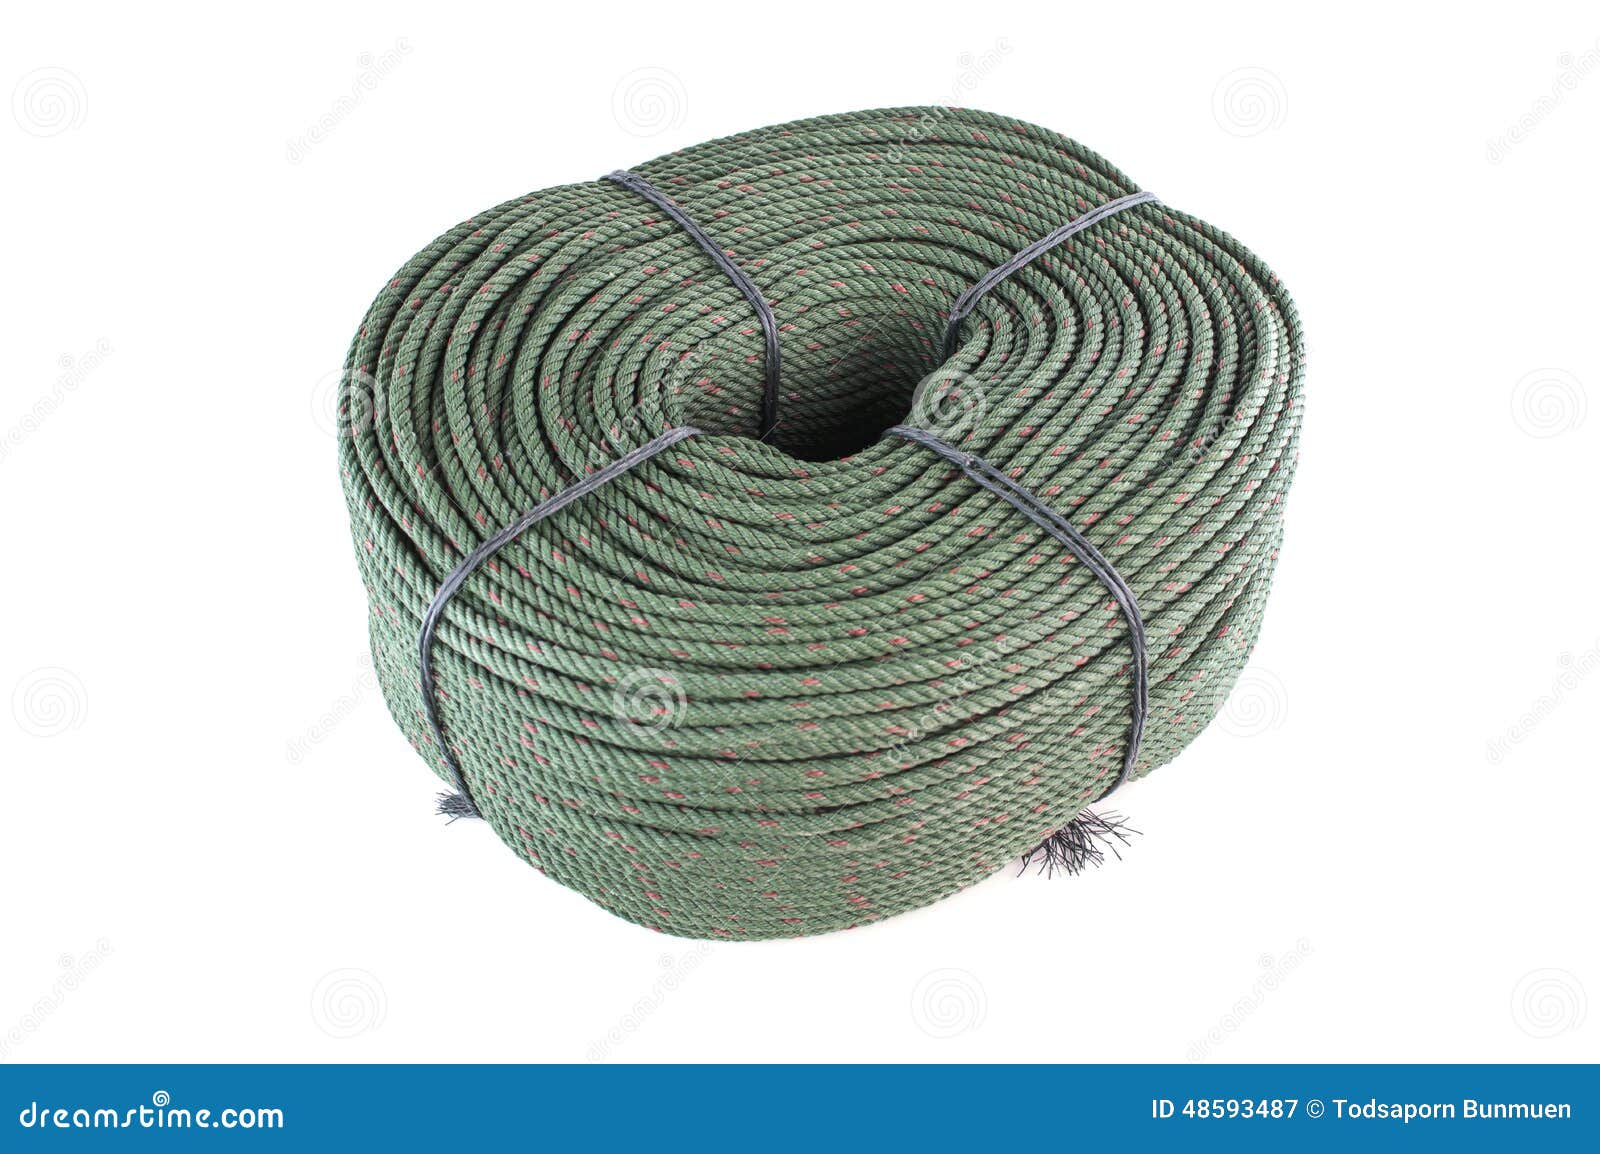 https://thumbs.dreamstime.com/z/roll-thick-green-nylon-rope-isolated-white-background-48593487.jpg